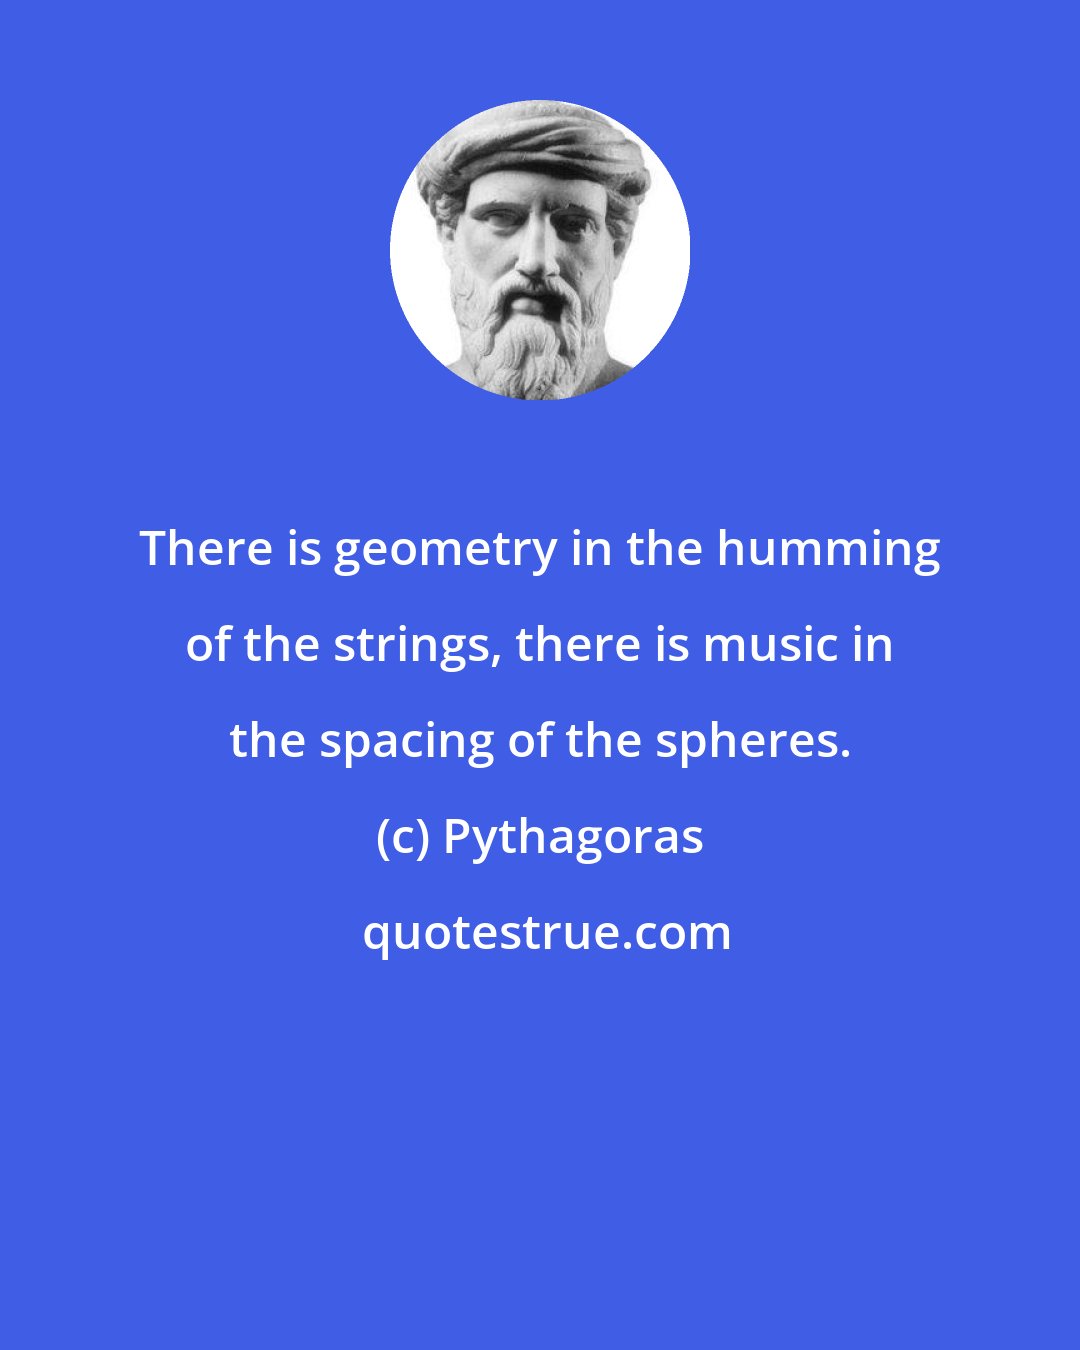 Pythagoras: There is geometry in the humming of the strings, there is music in the spacing of the spheres.